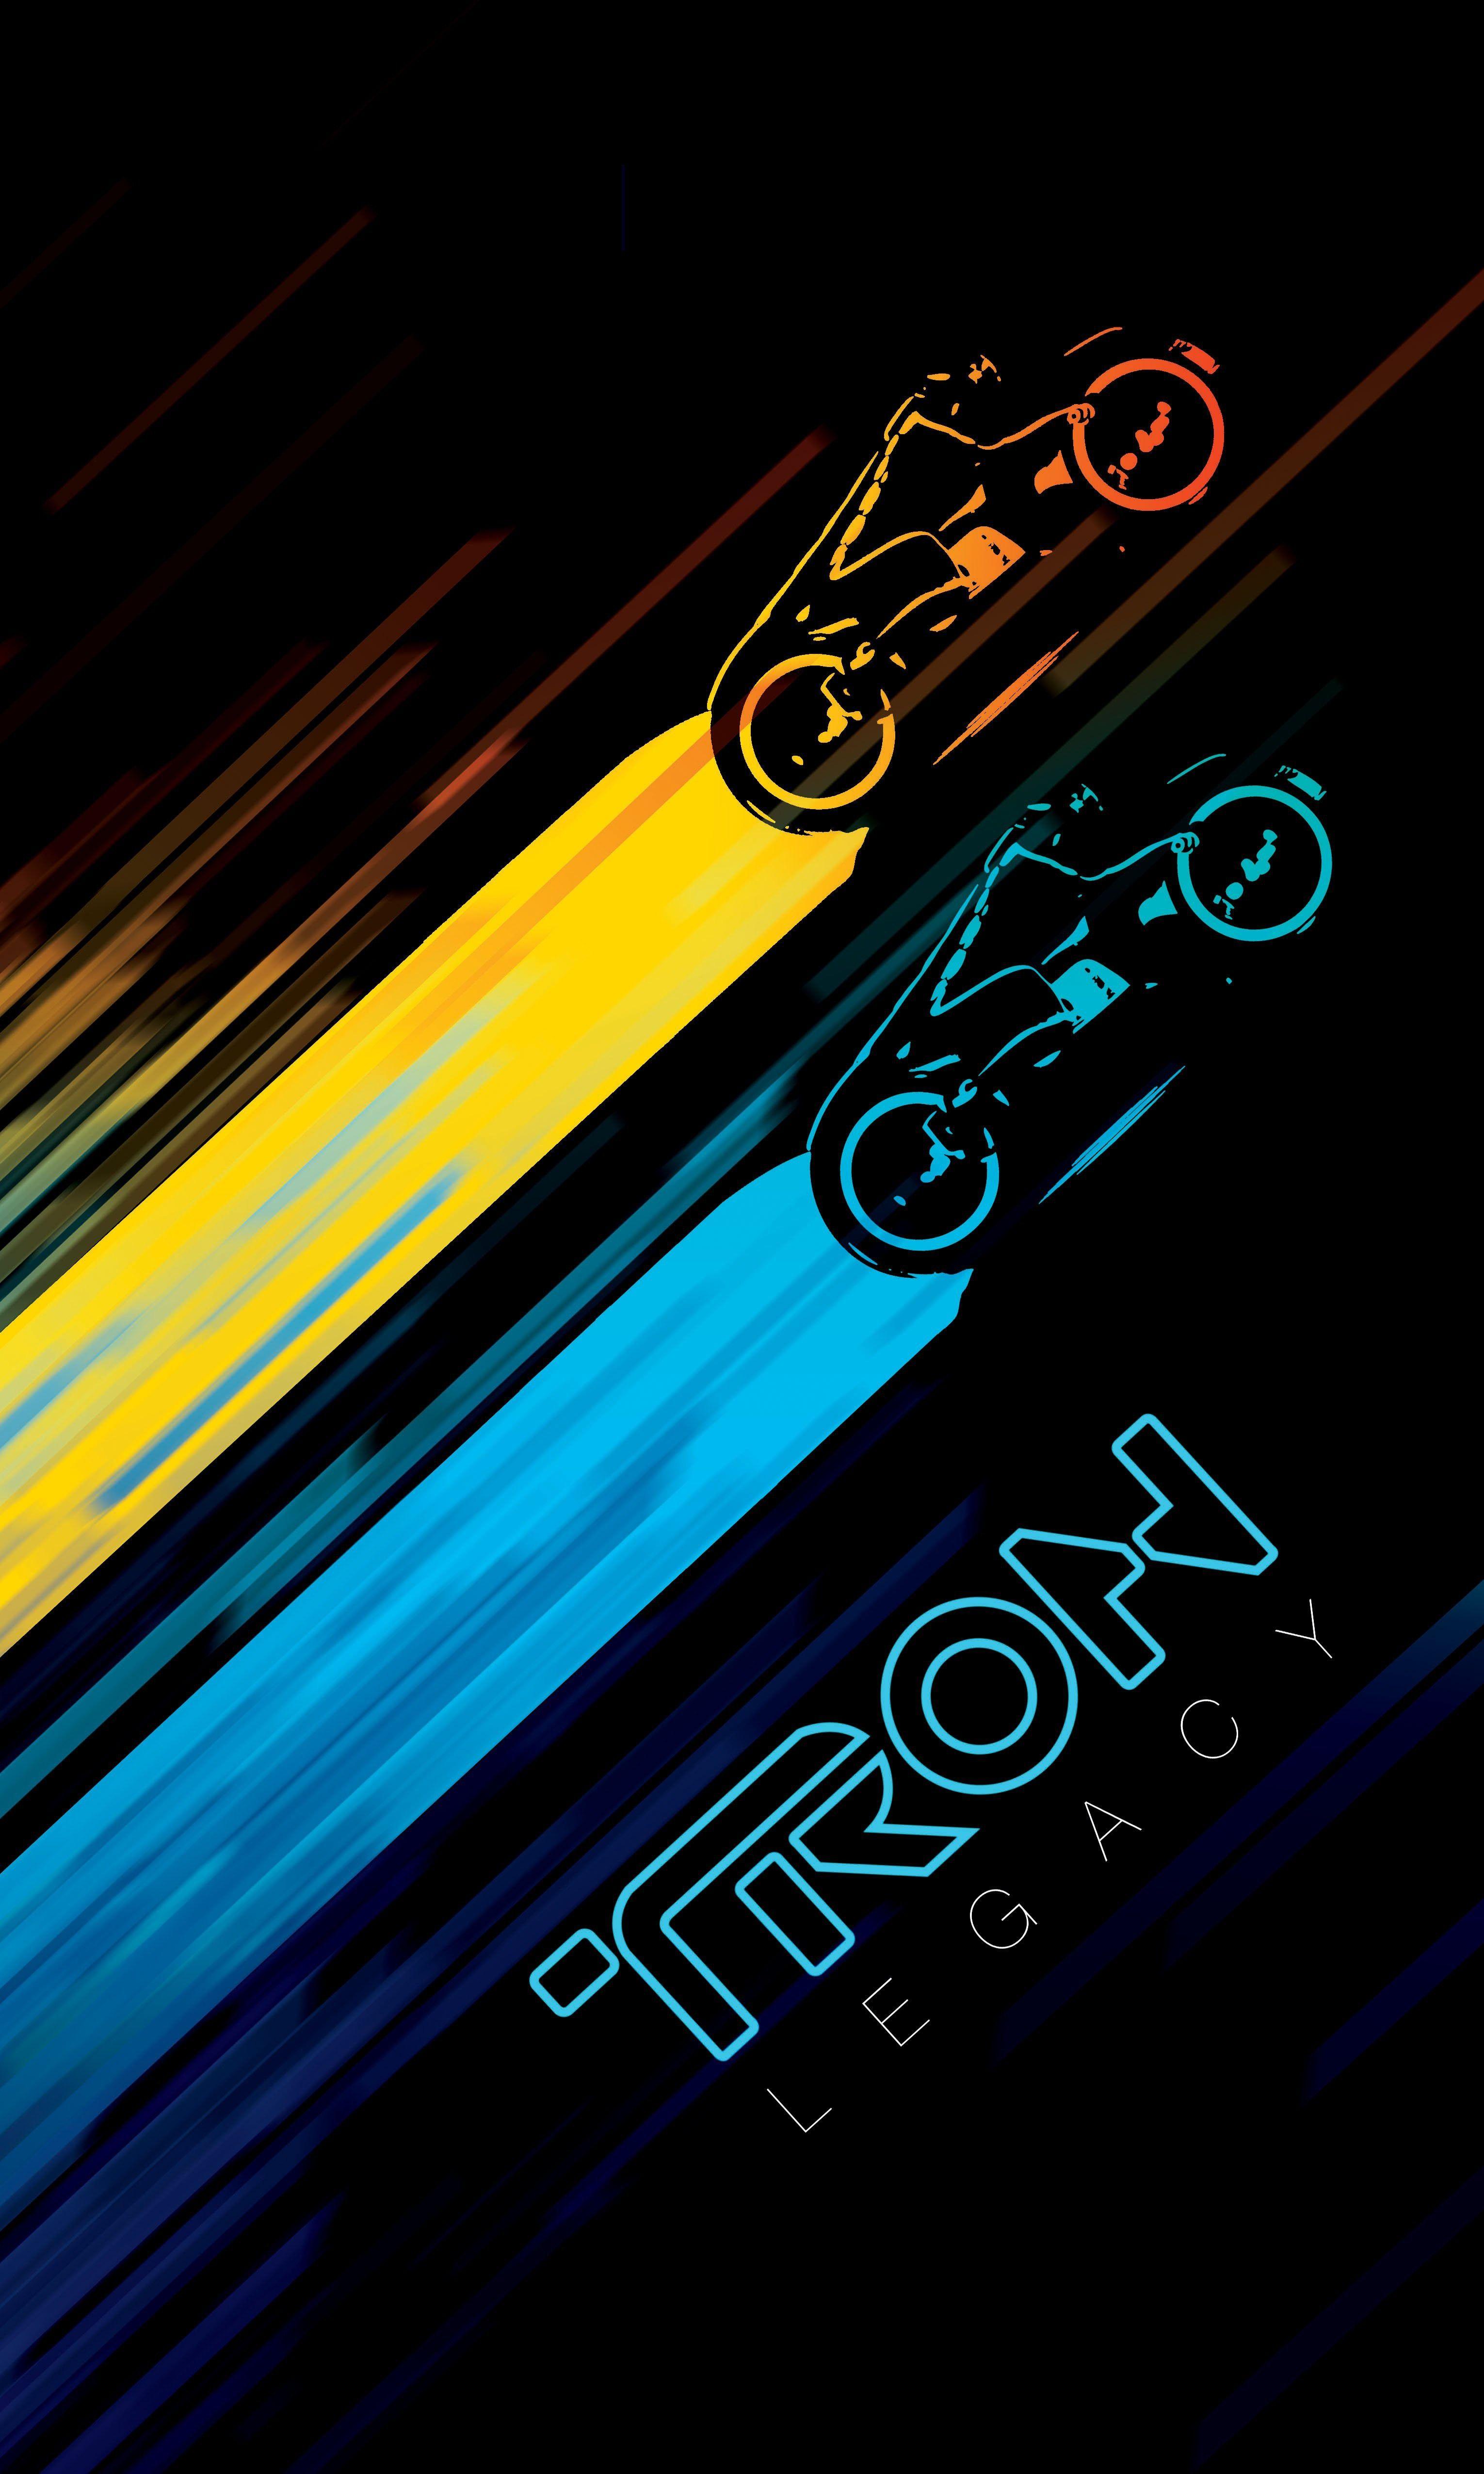 Tron Legacy Minimalist Wallpapers Wallpaper Cave